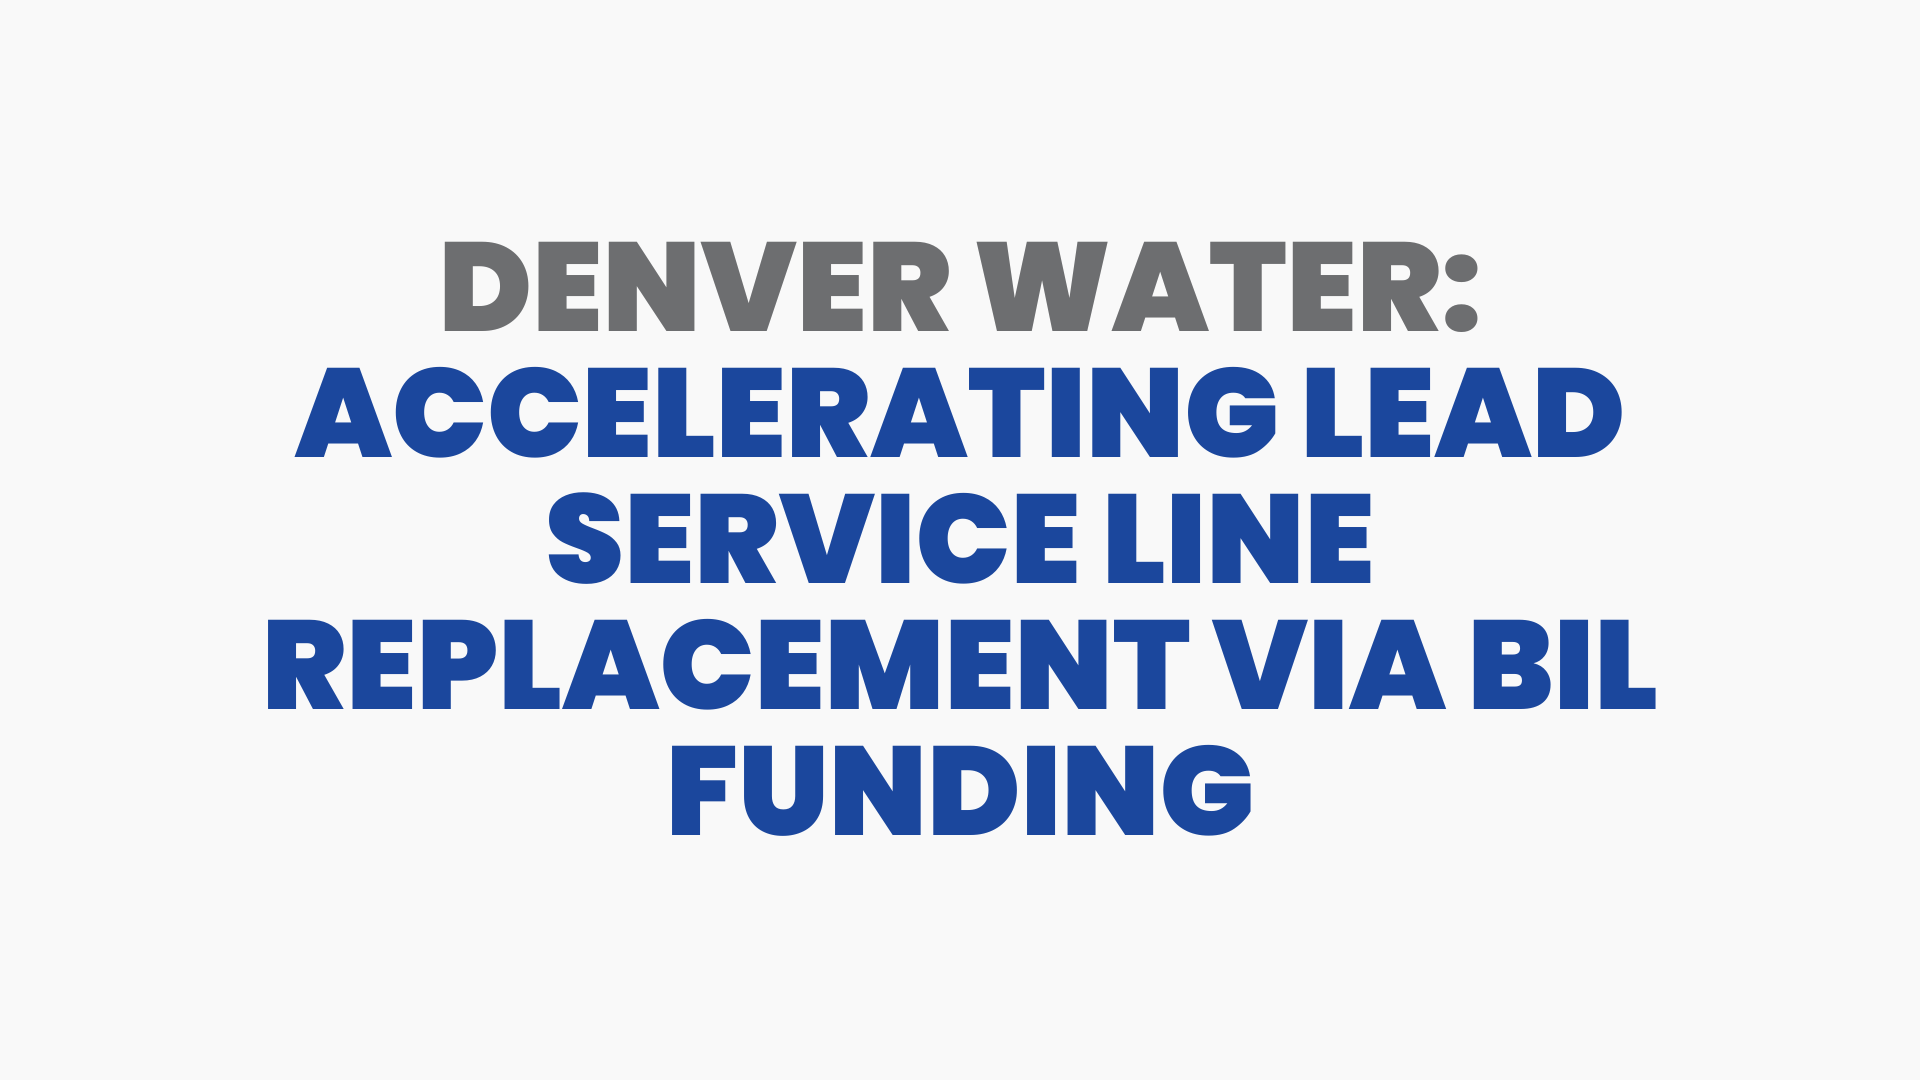 Denver Water: Accelerating Lead Service Line Replacement via BIL Funding